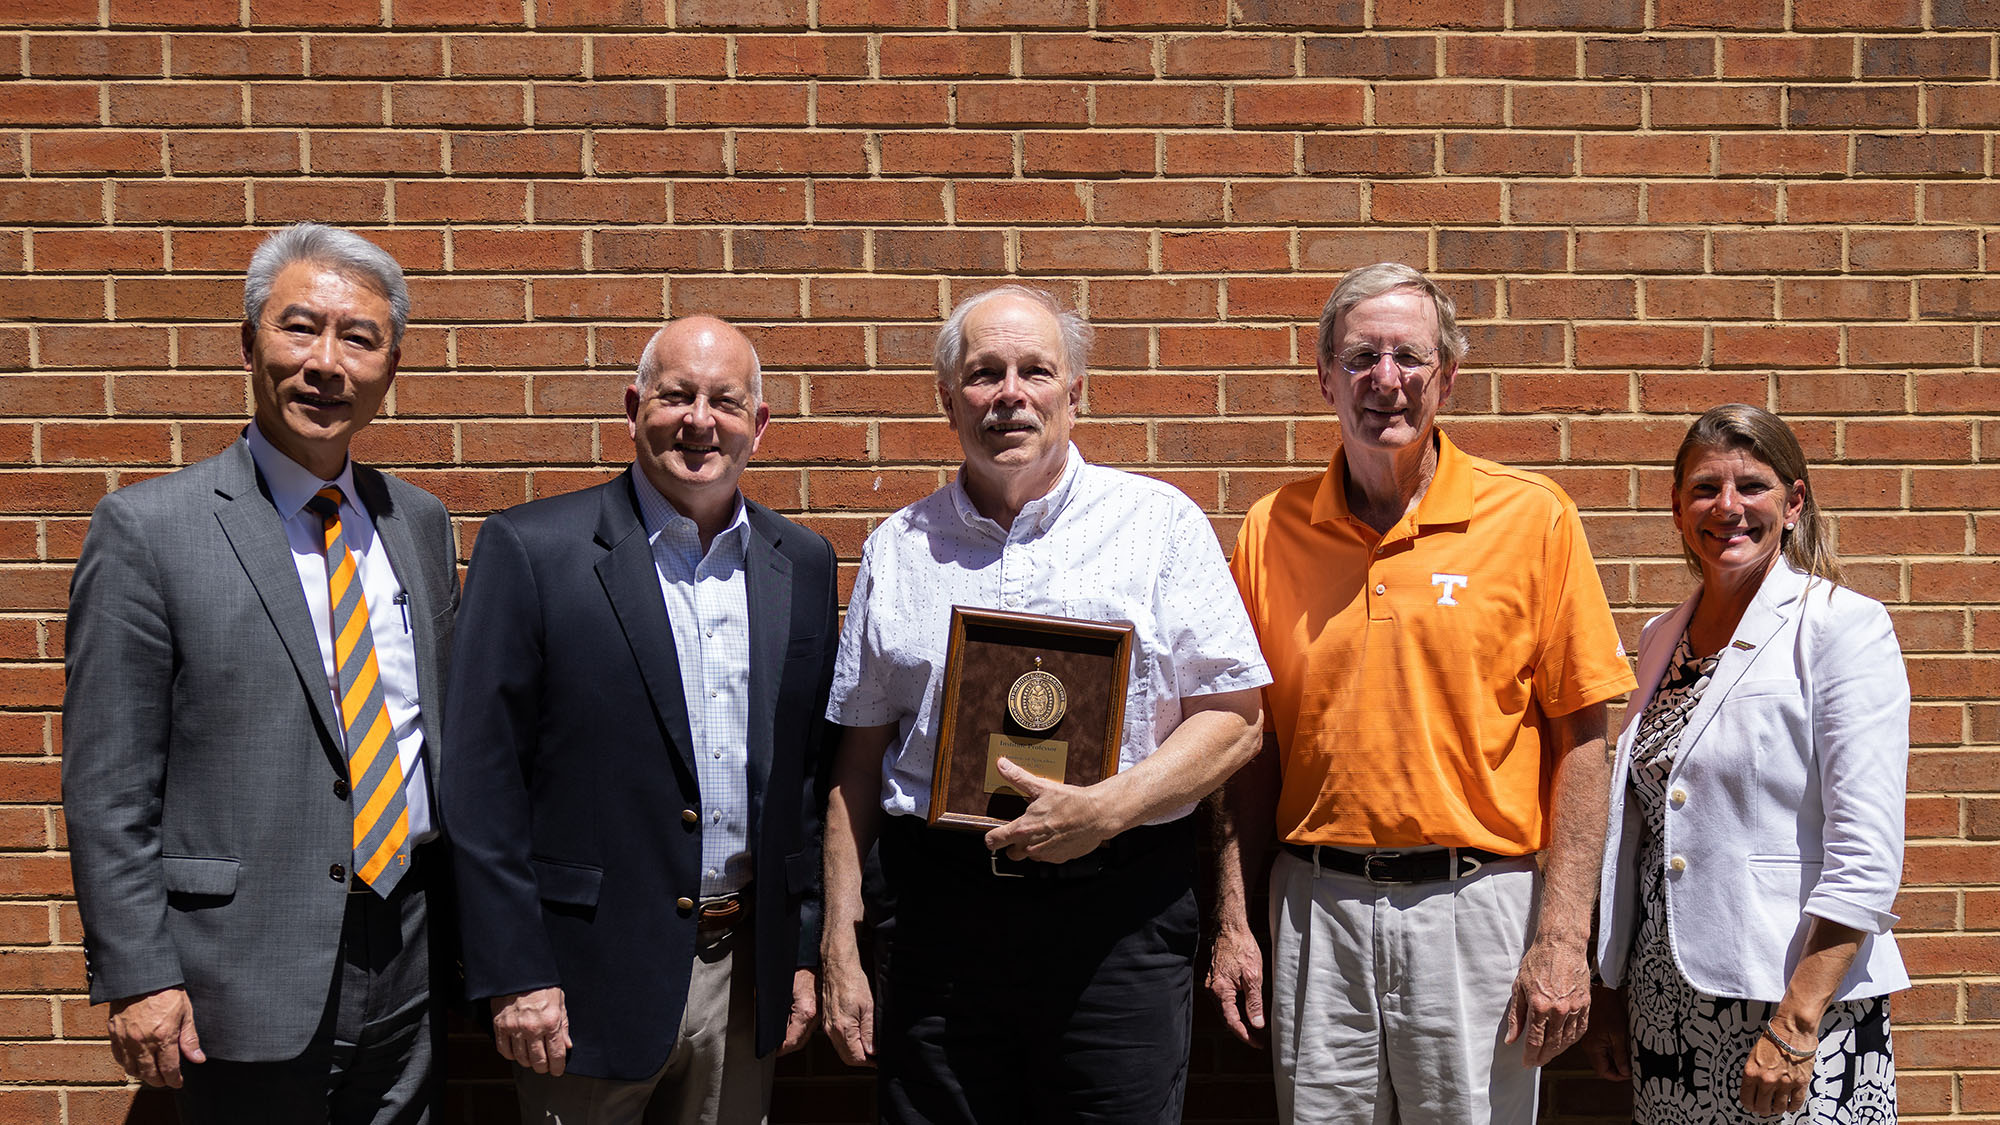 Left to right: Dean Xin, Dr. Carver, Ernest Bernard, Dr. Thompson, Dean Stokes pose in front of a brick wall. Ernest holds his award